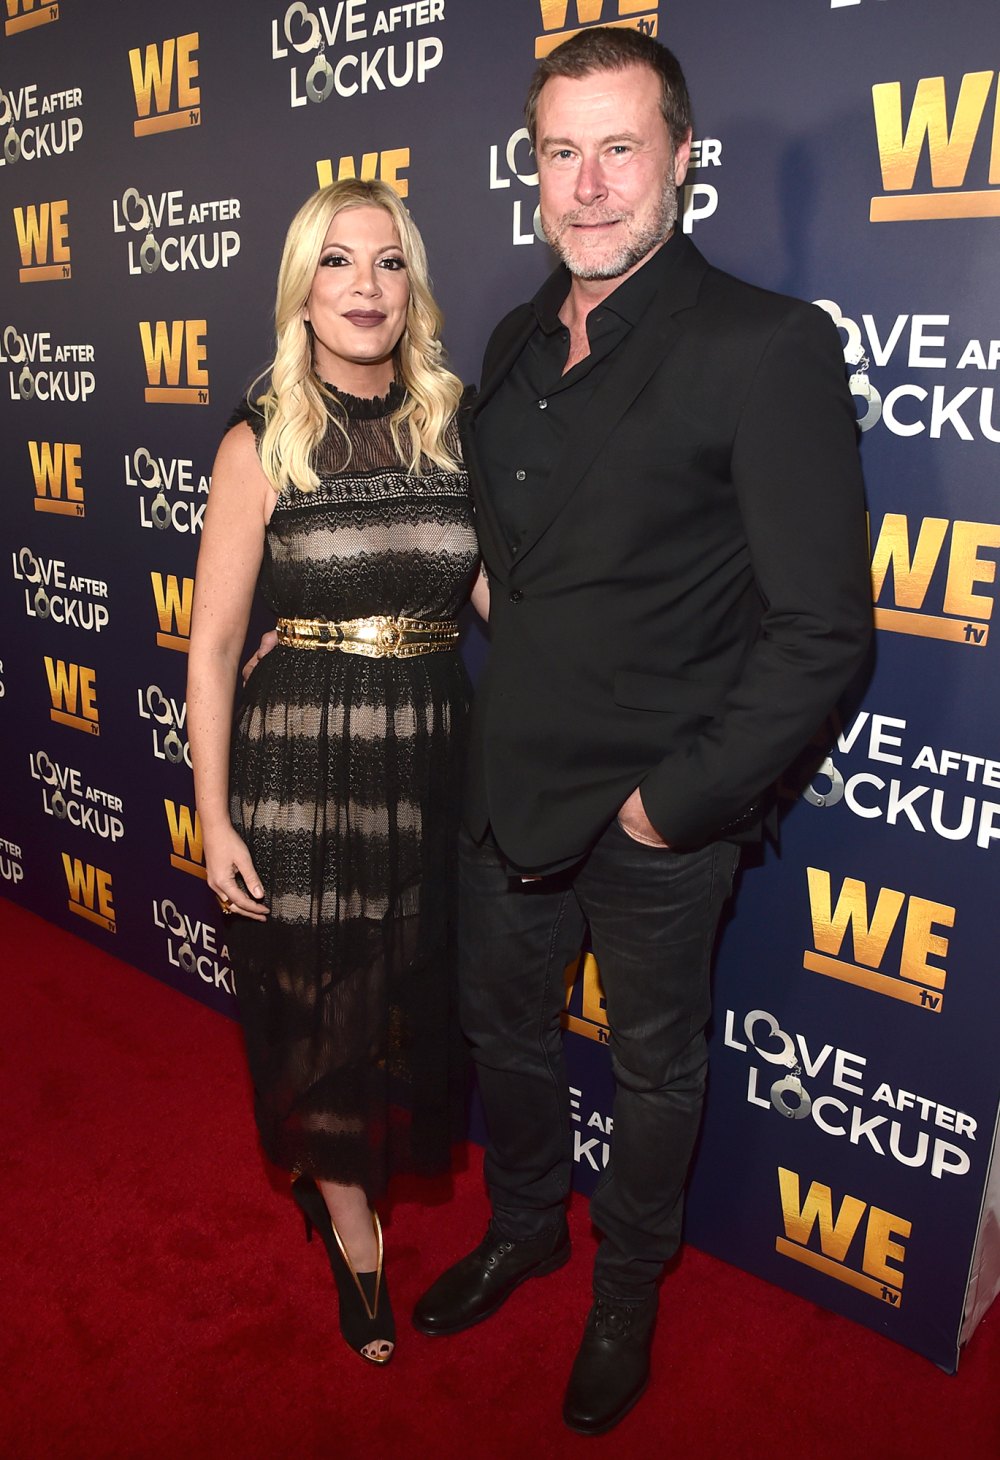 Tori Spelling and Estranged Husband Dean McDermott Are Each $200,000 in Debt on Previous Bank Loan